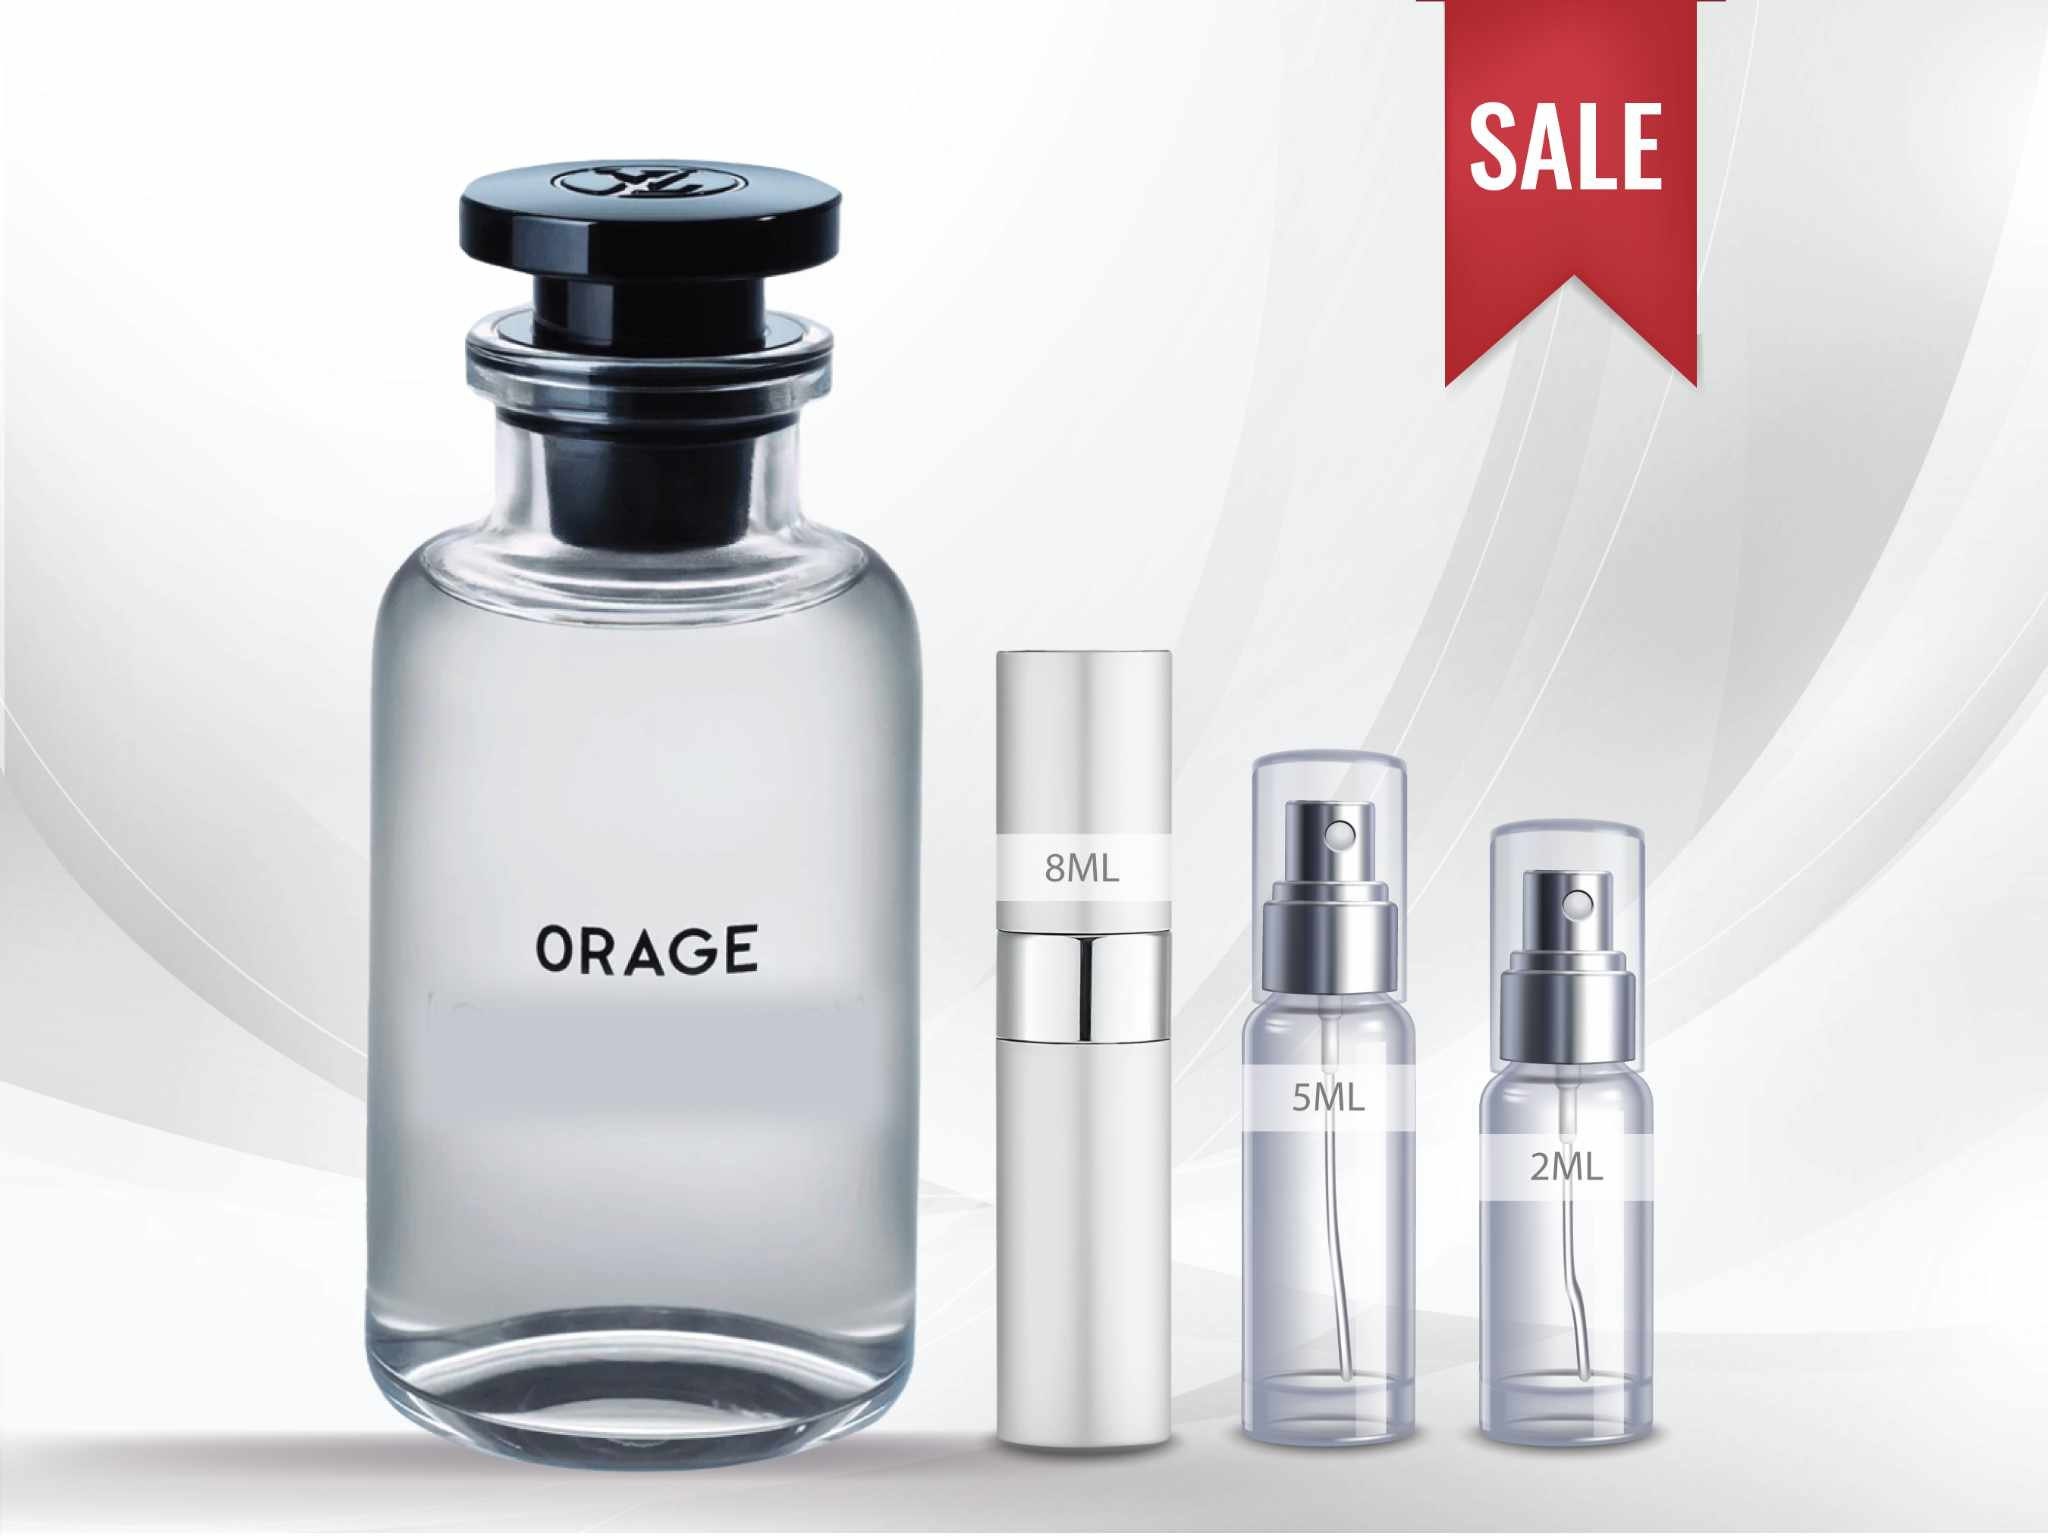 Shop for samples of Orage (Eau de Parfum) by Louis Vuitton for men  rebottled and repacked by